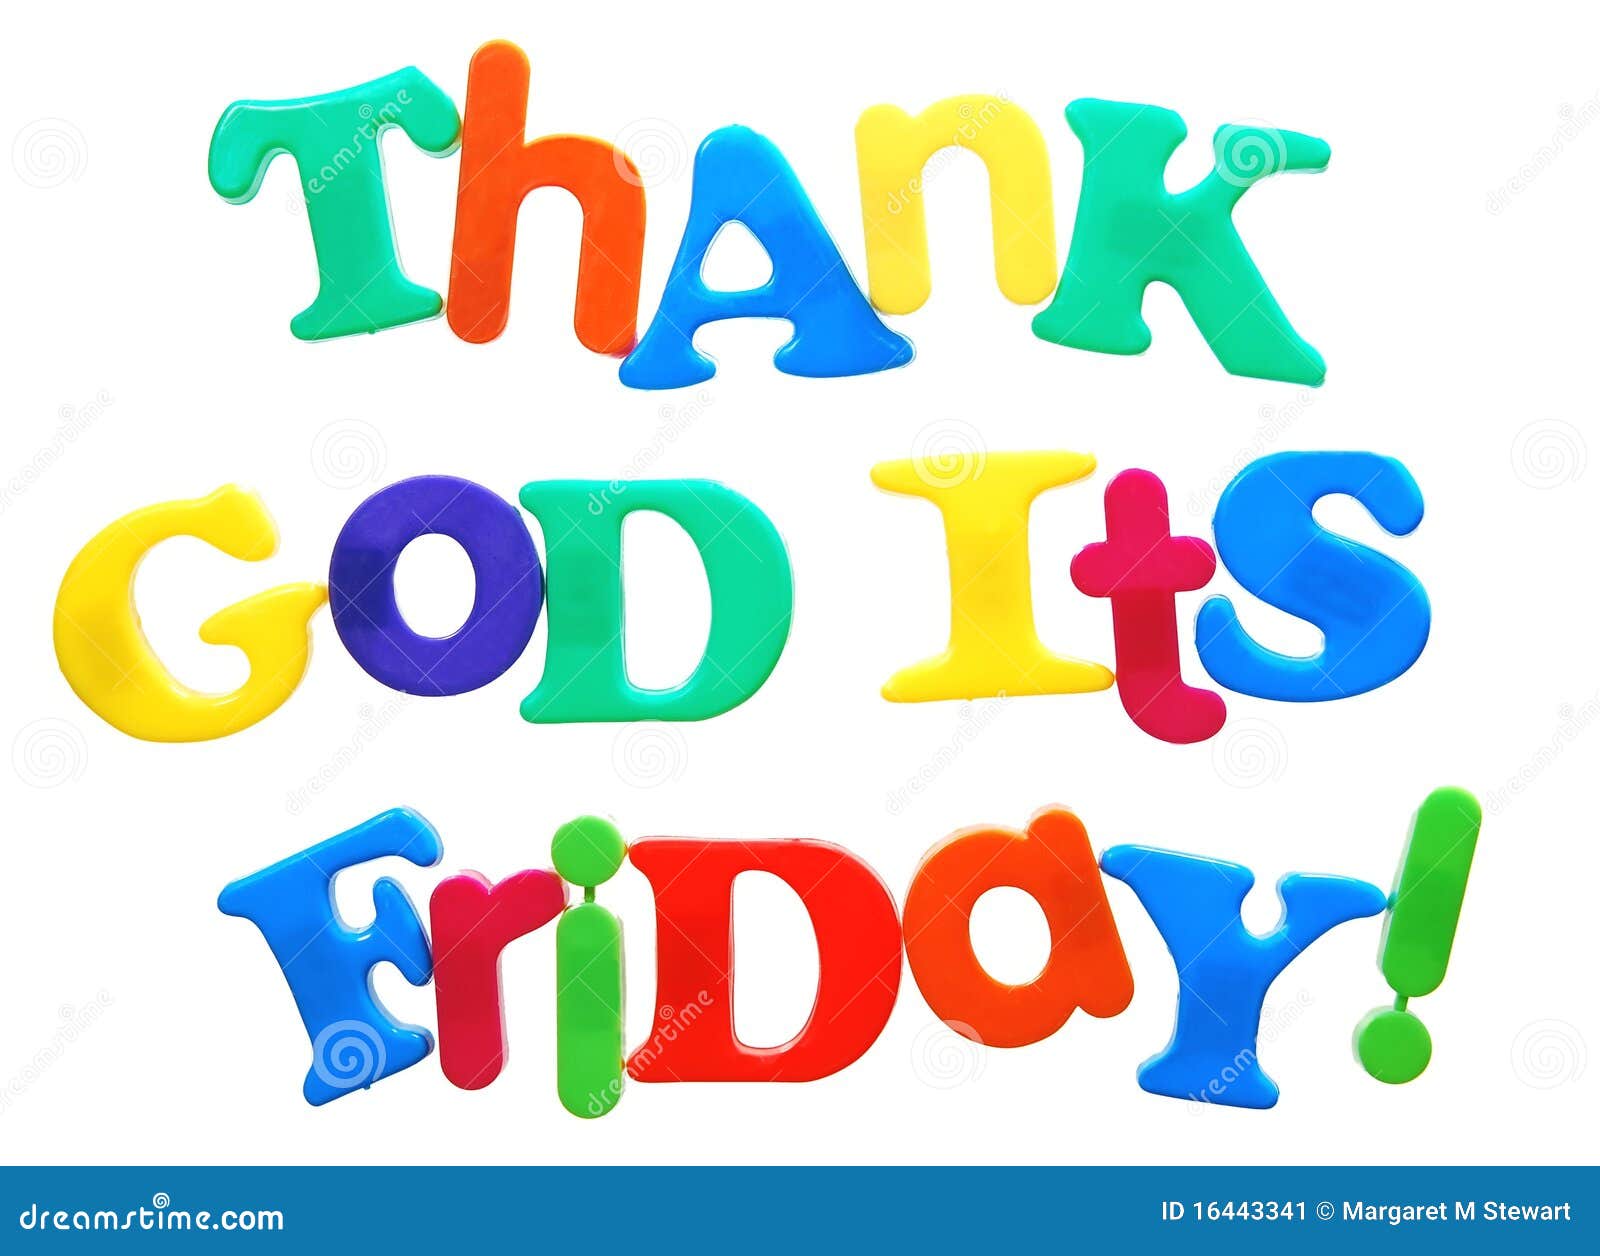 Thank God it s Friday stock image. Image of week, text - 16443341